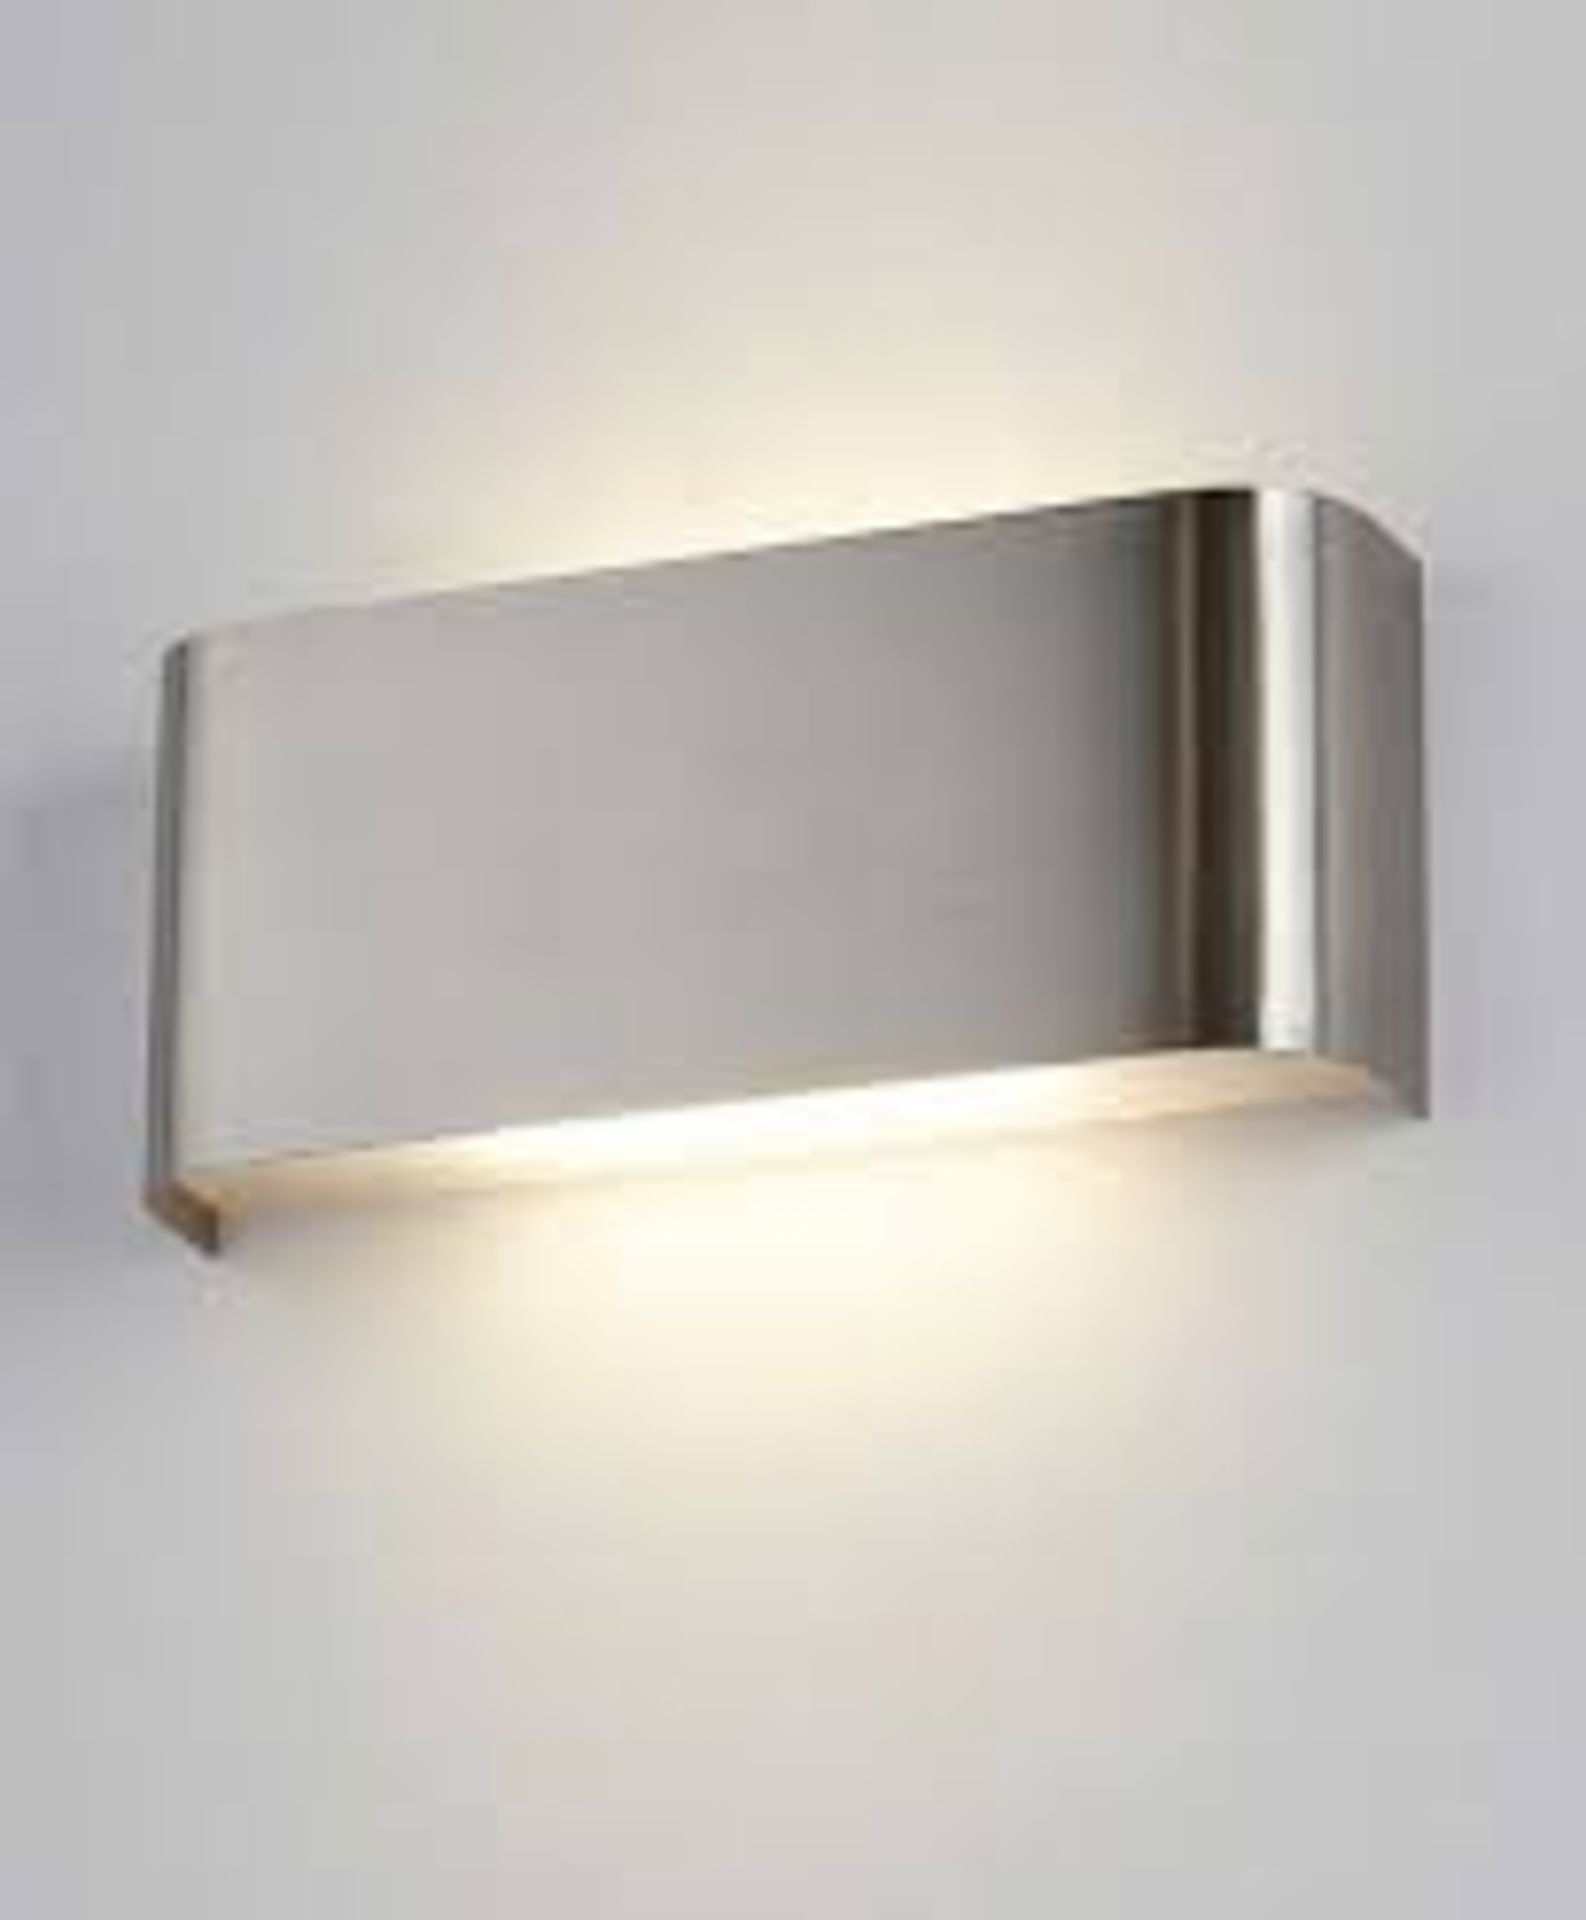 3 x Searchlight Wall Up/downlight in satin silver - Ref: 1953SS - New and Boxed - RRP: £105(each) - Image 3 of 4